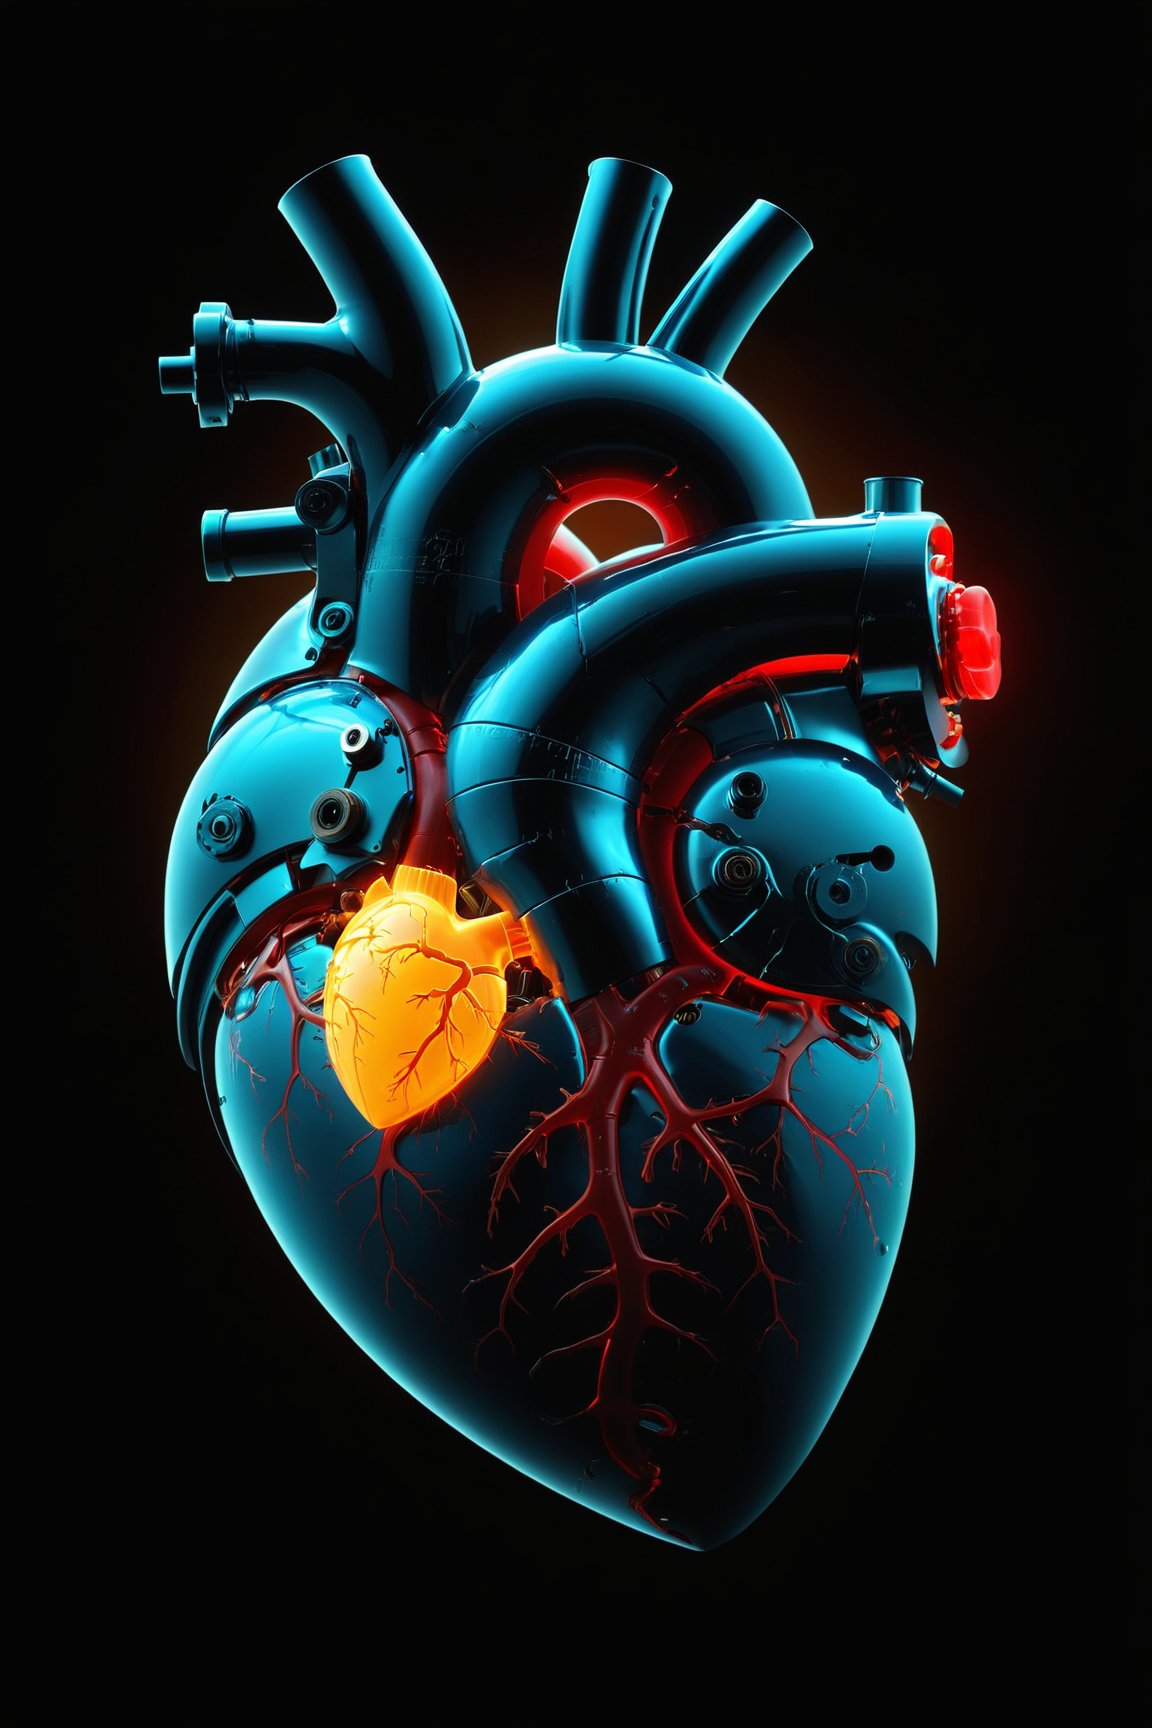 mechanical  heart, bleading oil, glowing veins, multicolor
Wide range of colors., Dramatic,Dynamic,Cinematic,Sharp details
Insane quality. Insane resolution. Insane details. Masterpiece. 32k resolution.
  dvr-lnds-sdxl   ral-apoctvisn  dark, chiaroscuro, low-key  zavy-rmlght